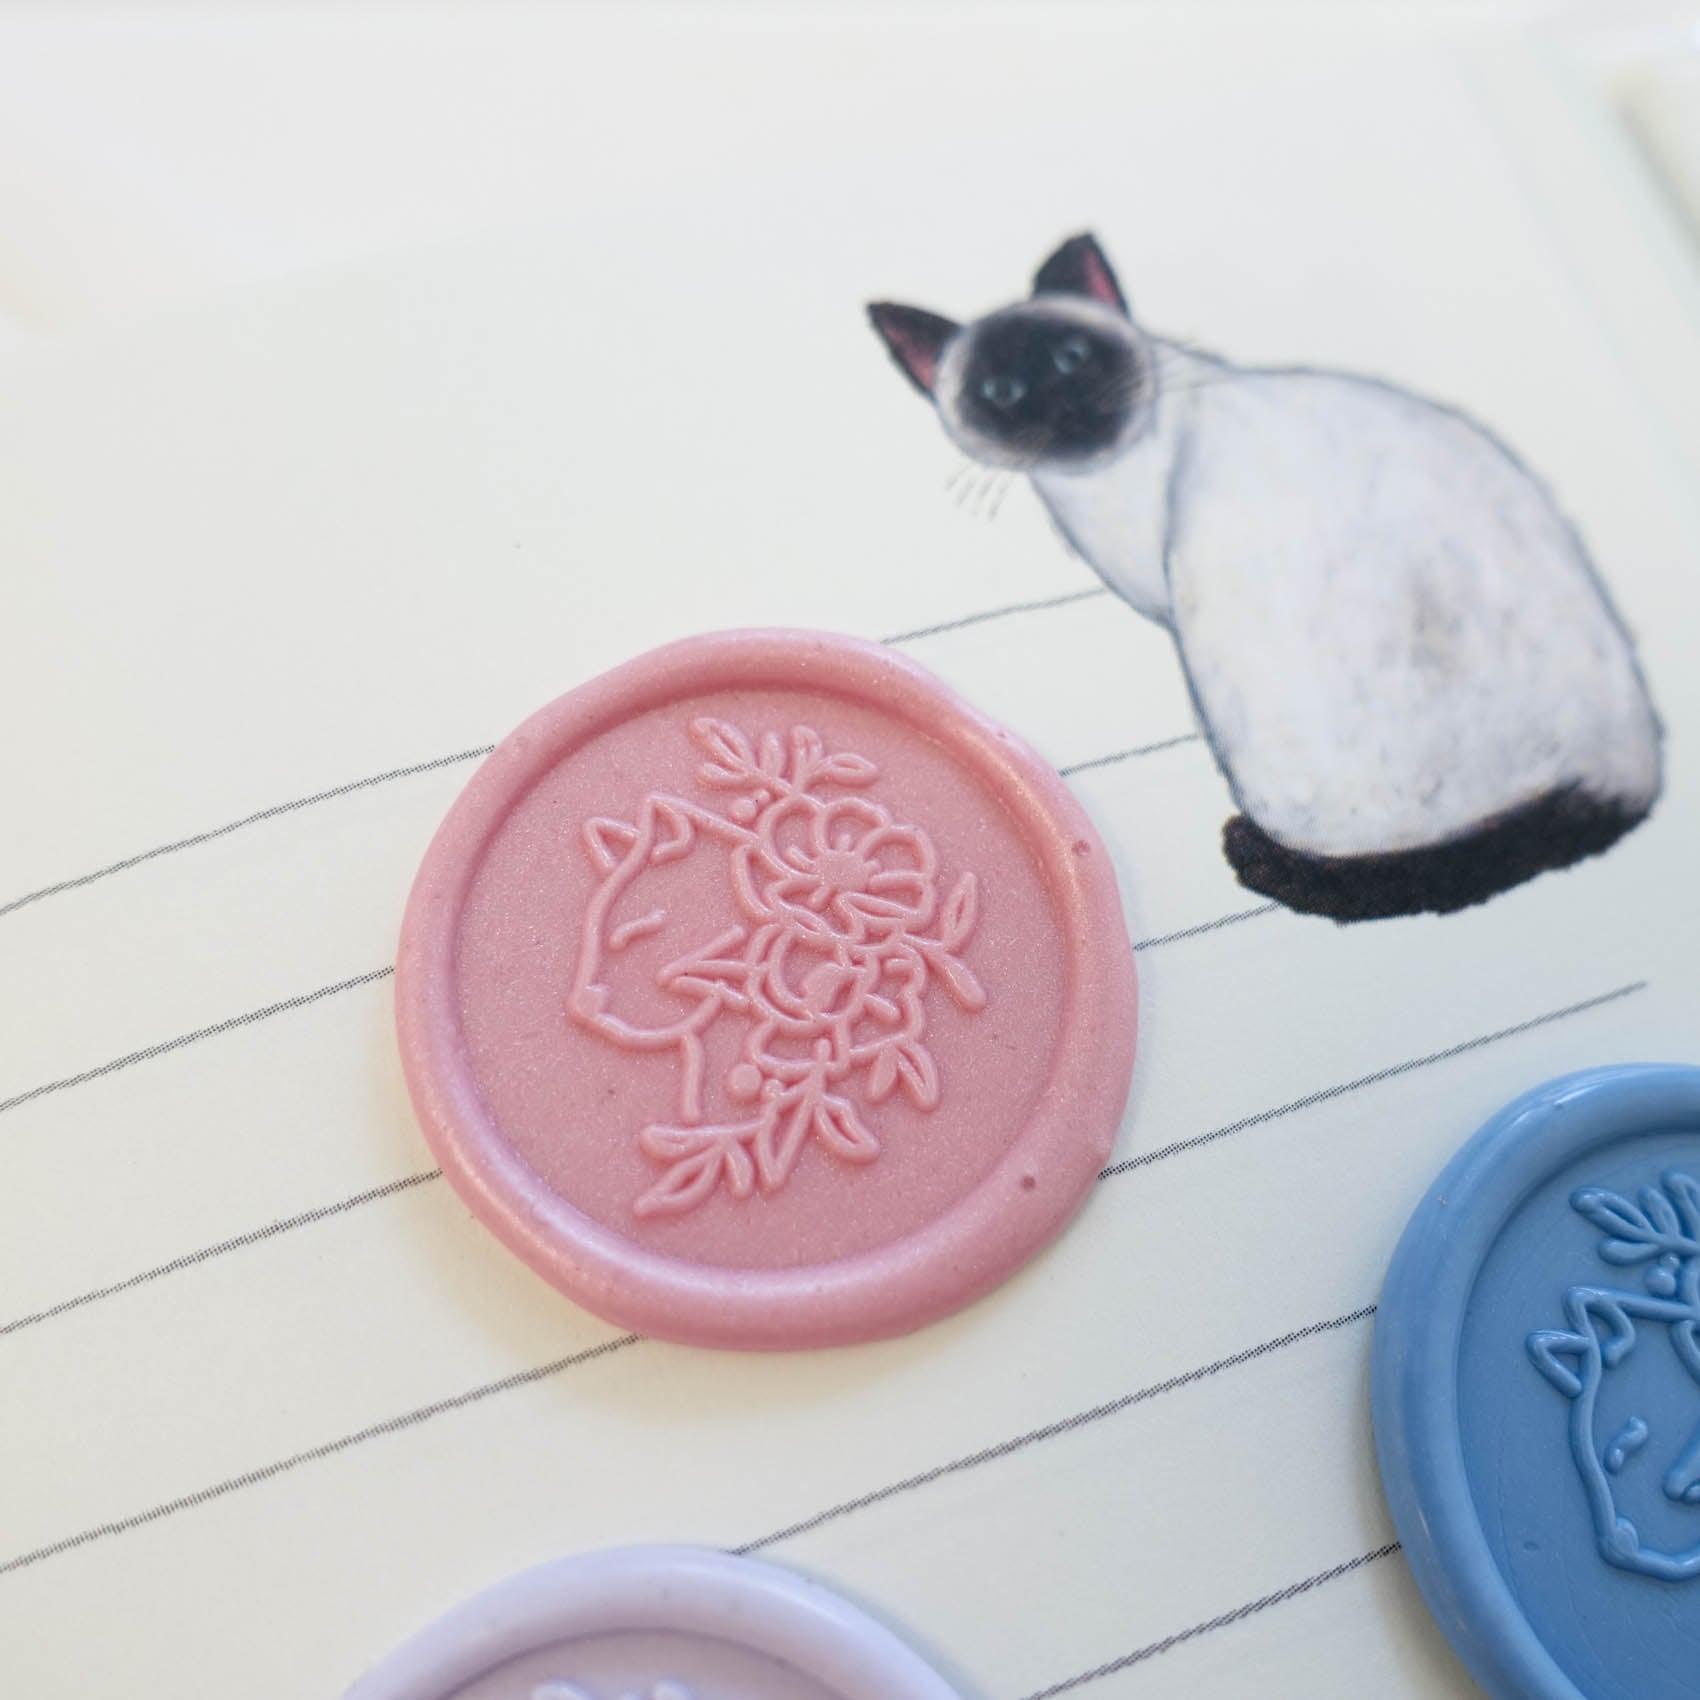 [PRE-ORDER] Floral Cat Portrait wax seal stamp, wax seal kit or stamp head